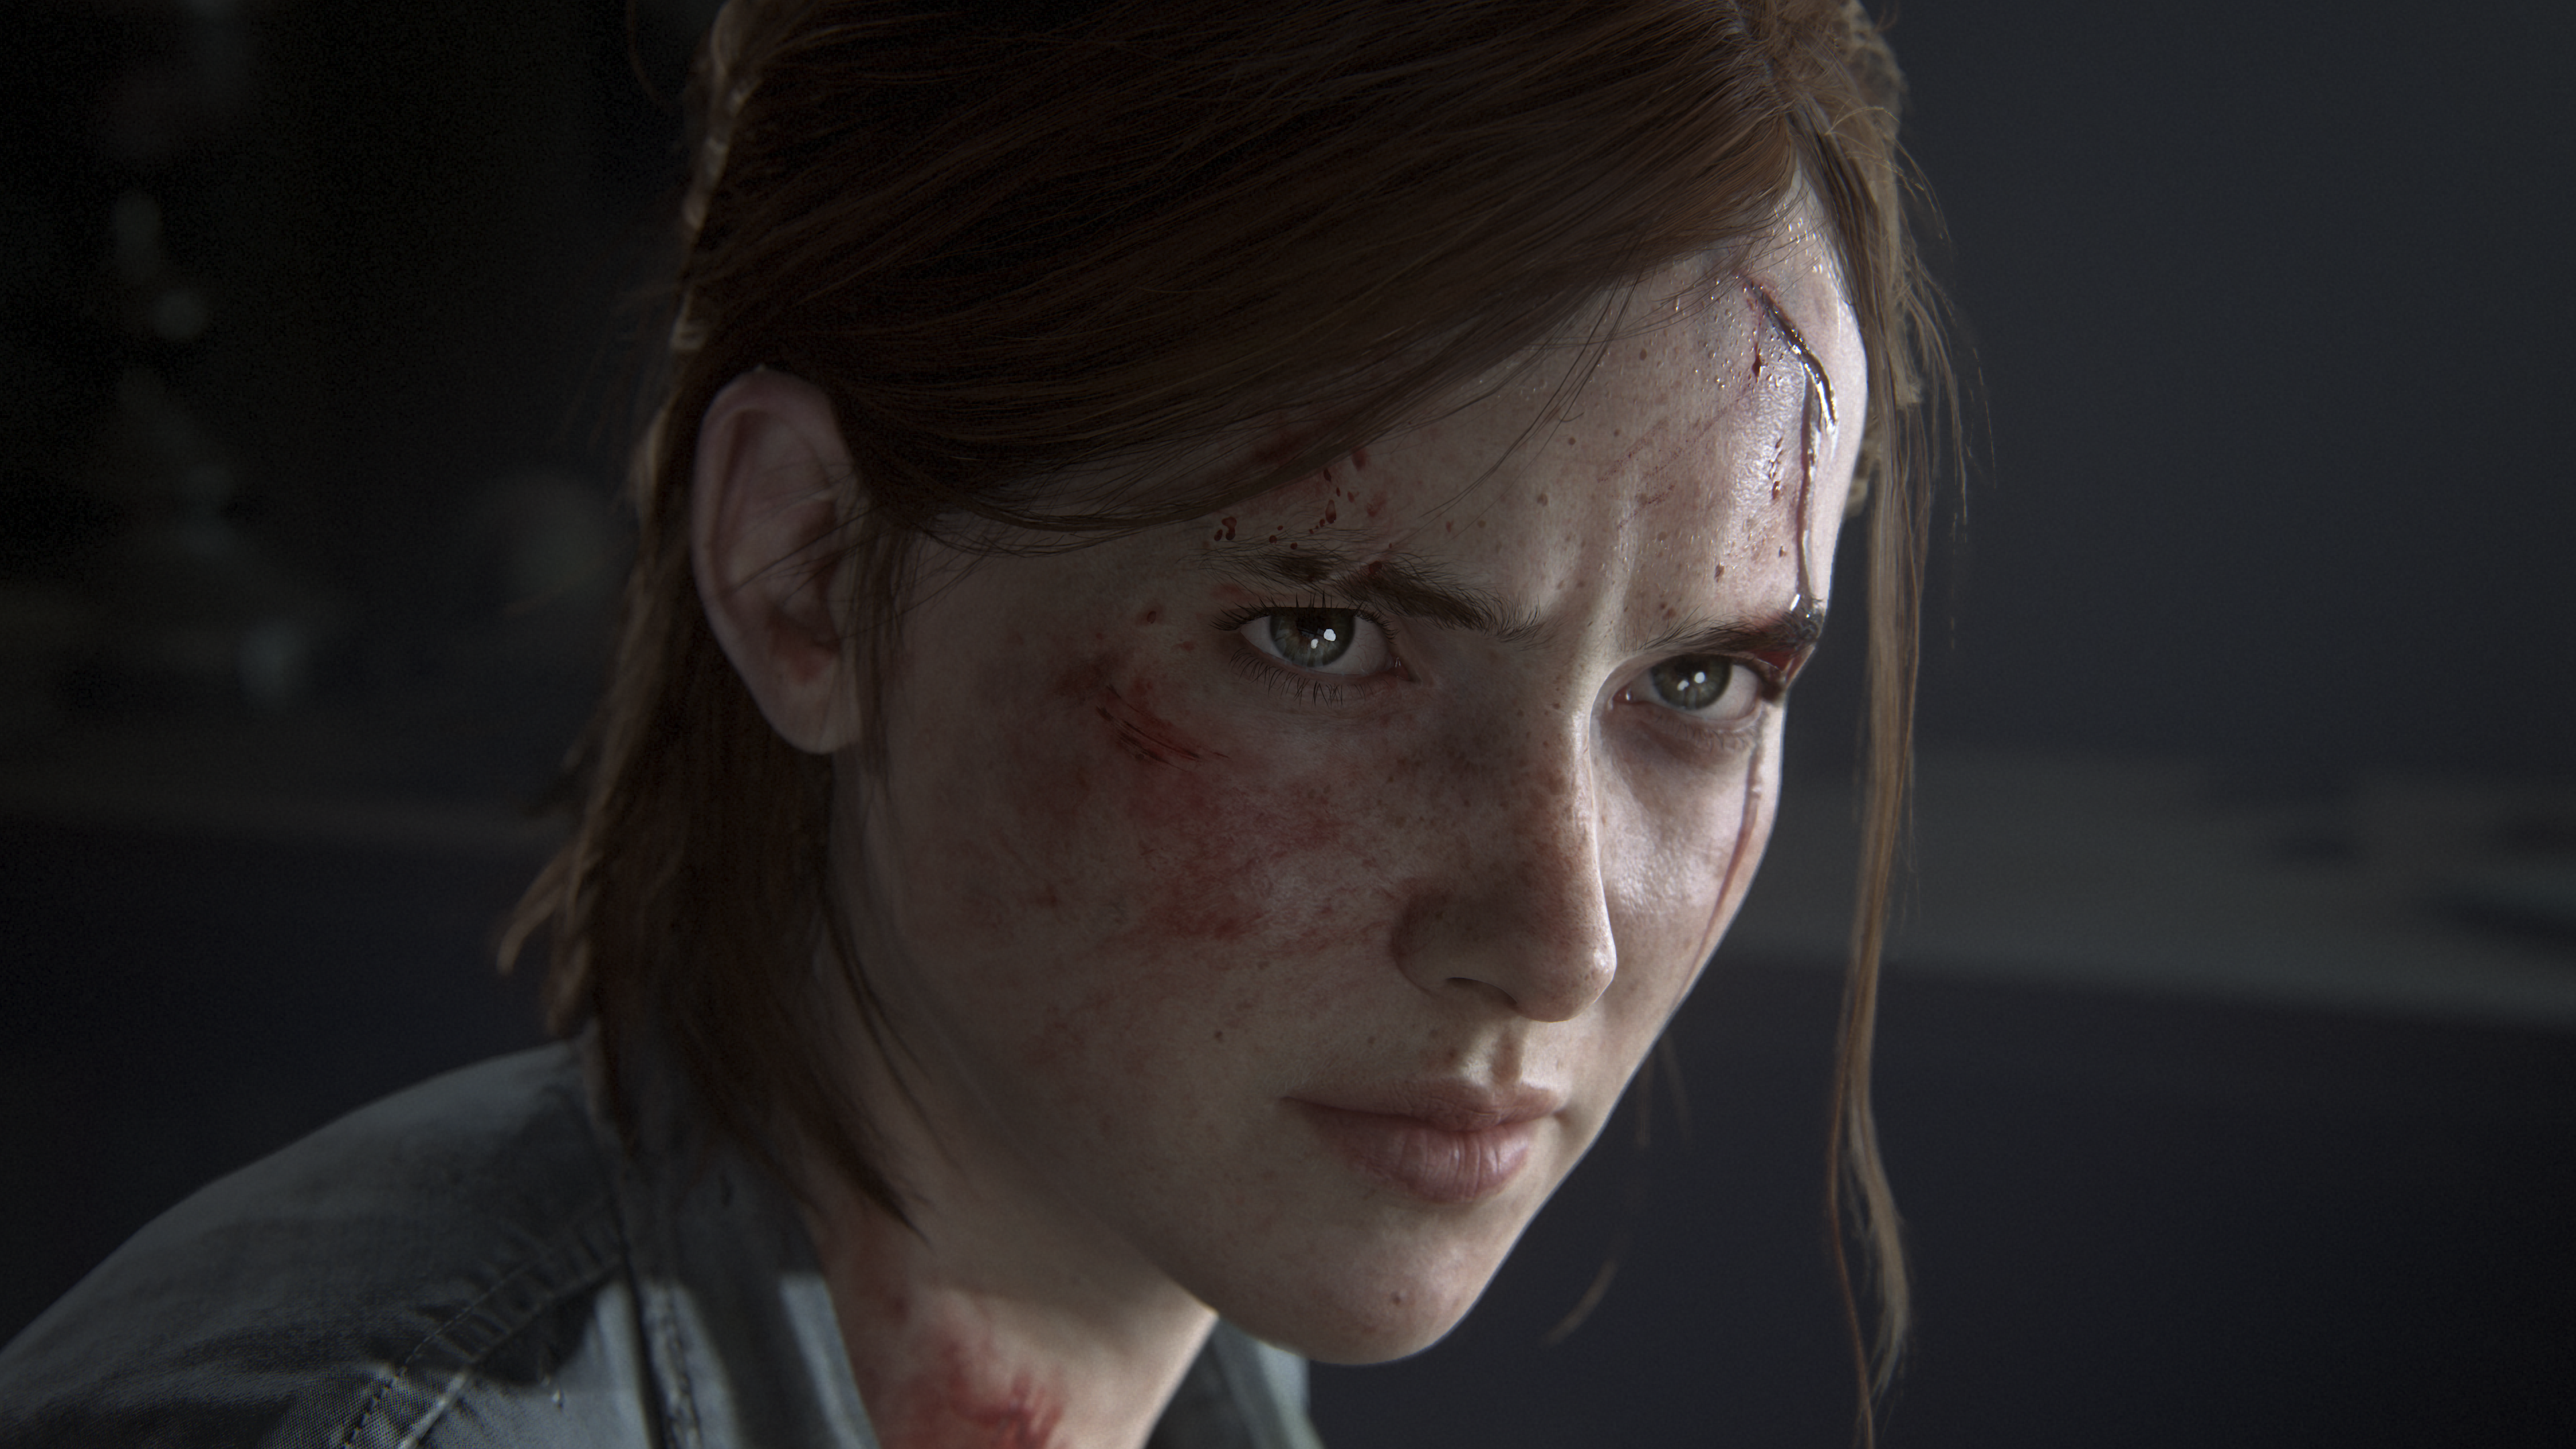 Naughty Dog on X: Ellie's tattoo from The Last of Us Part II